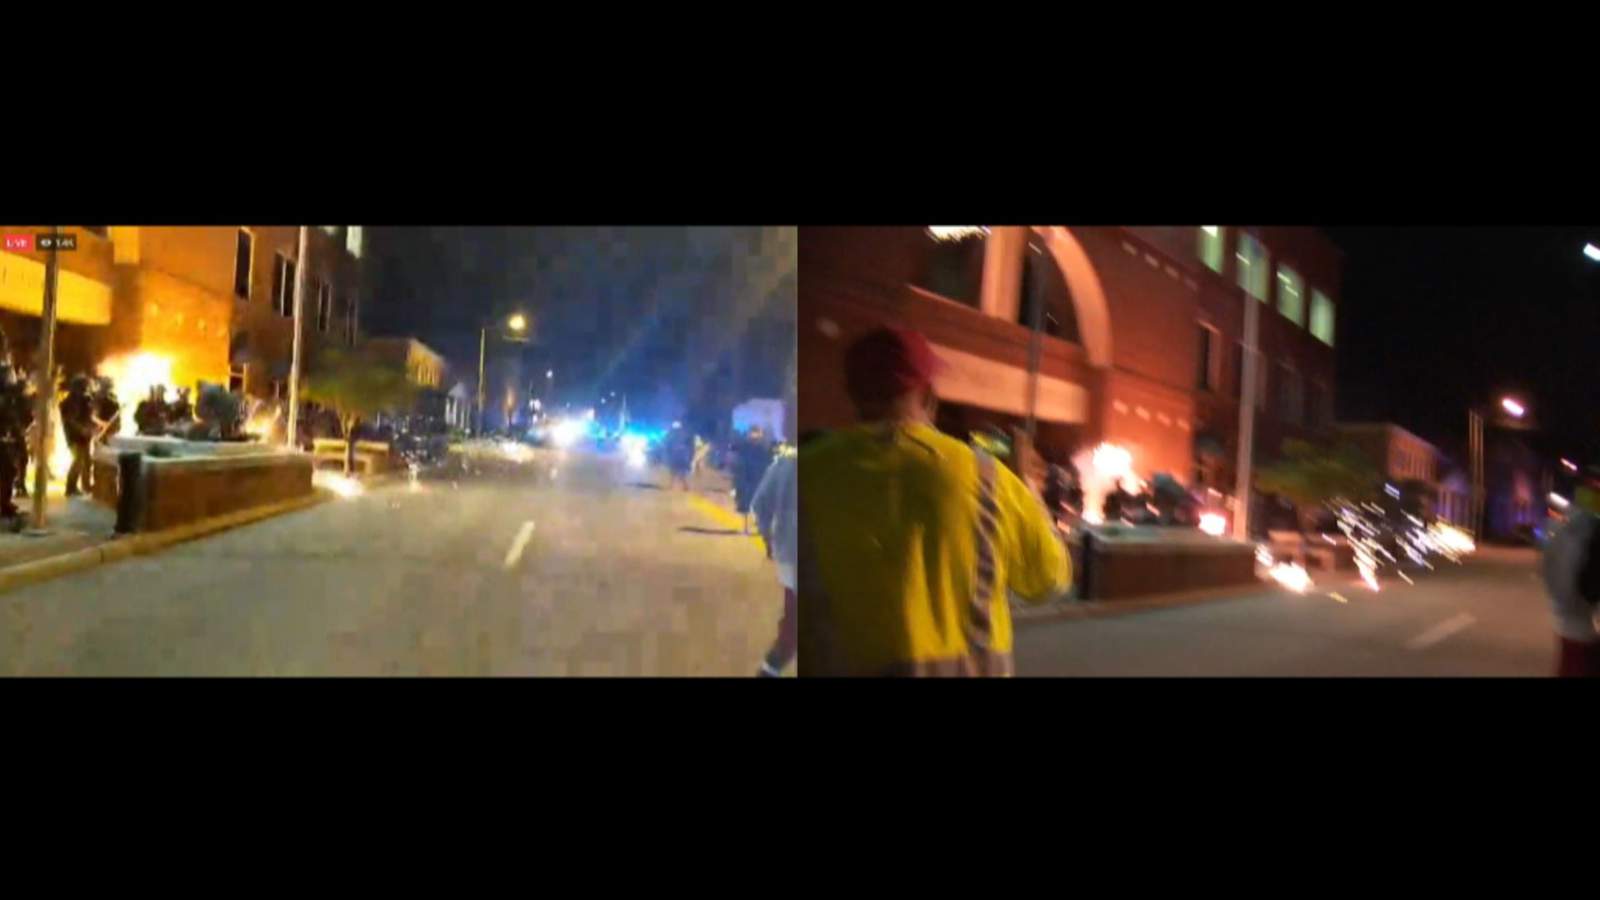 State trooper hit by firework during Roanoke protest has minor injuries